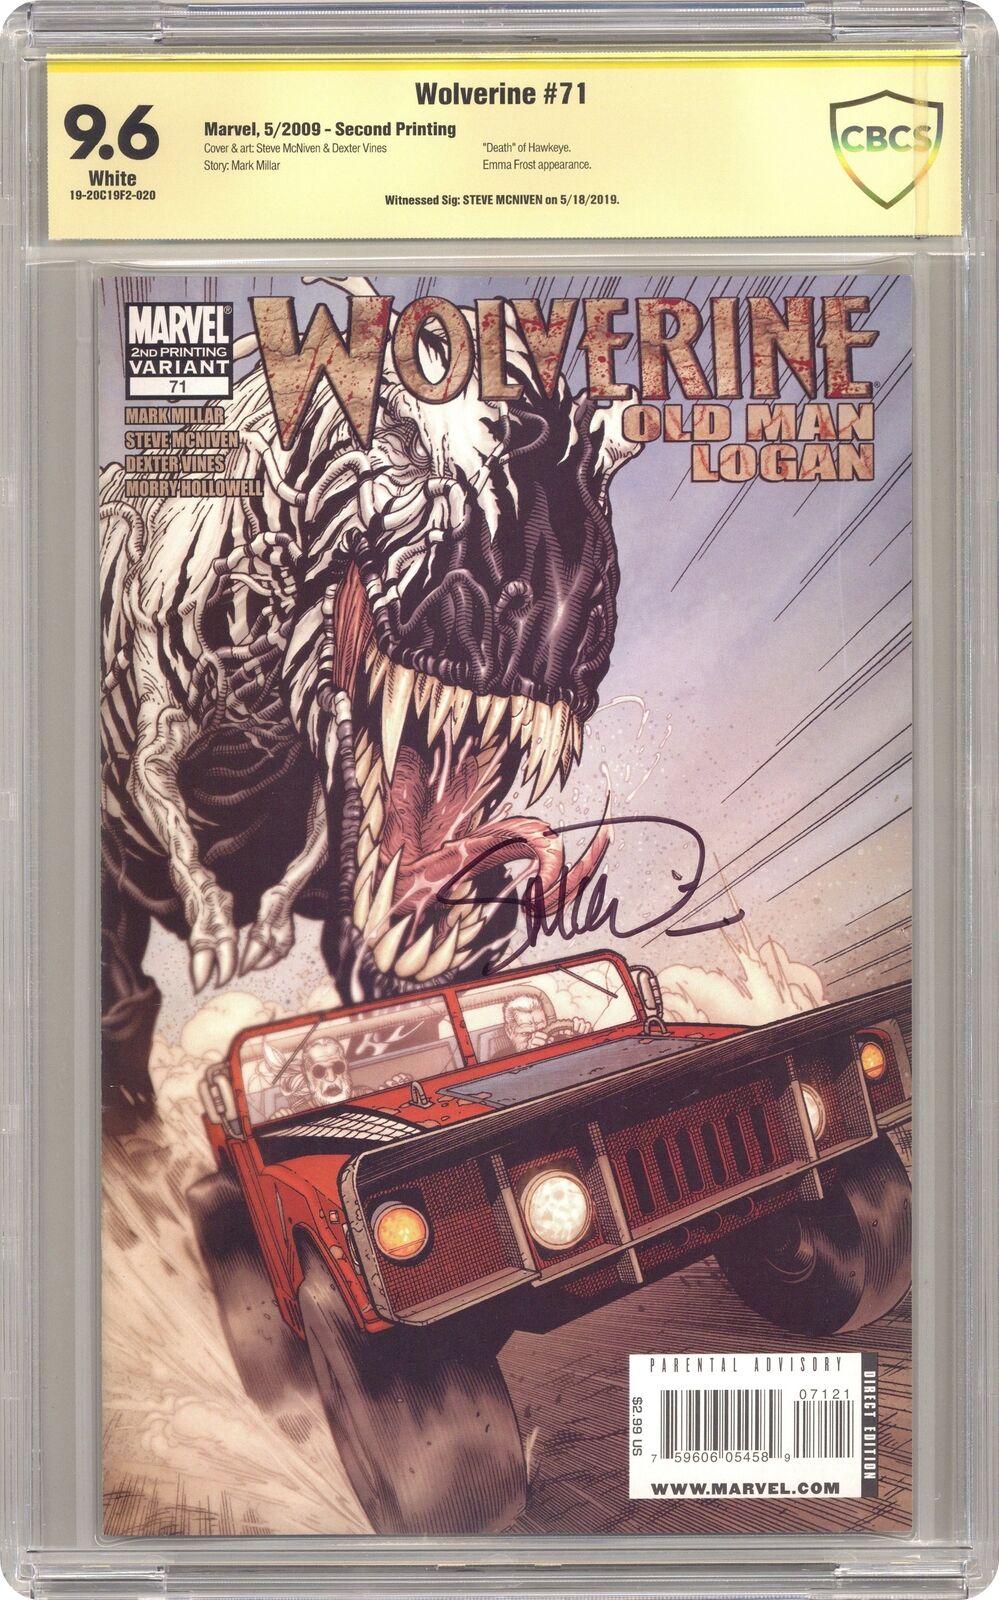 Wolverine #71 2nd Printing CBCS 9.6 SS McNiven 2009 19-20C19F2-020